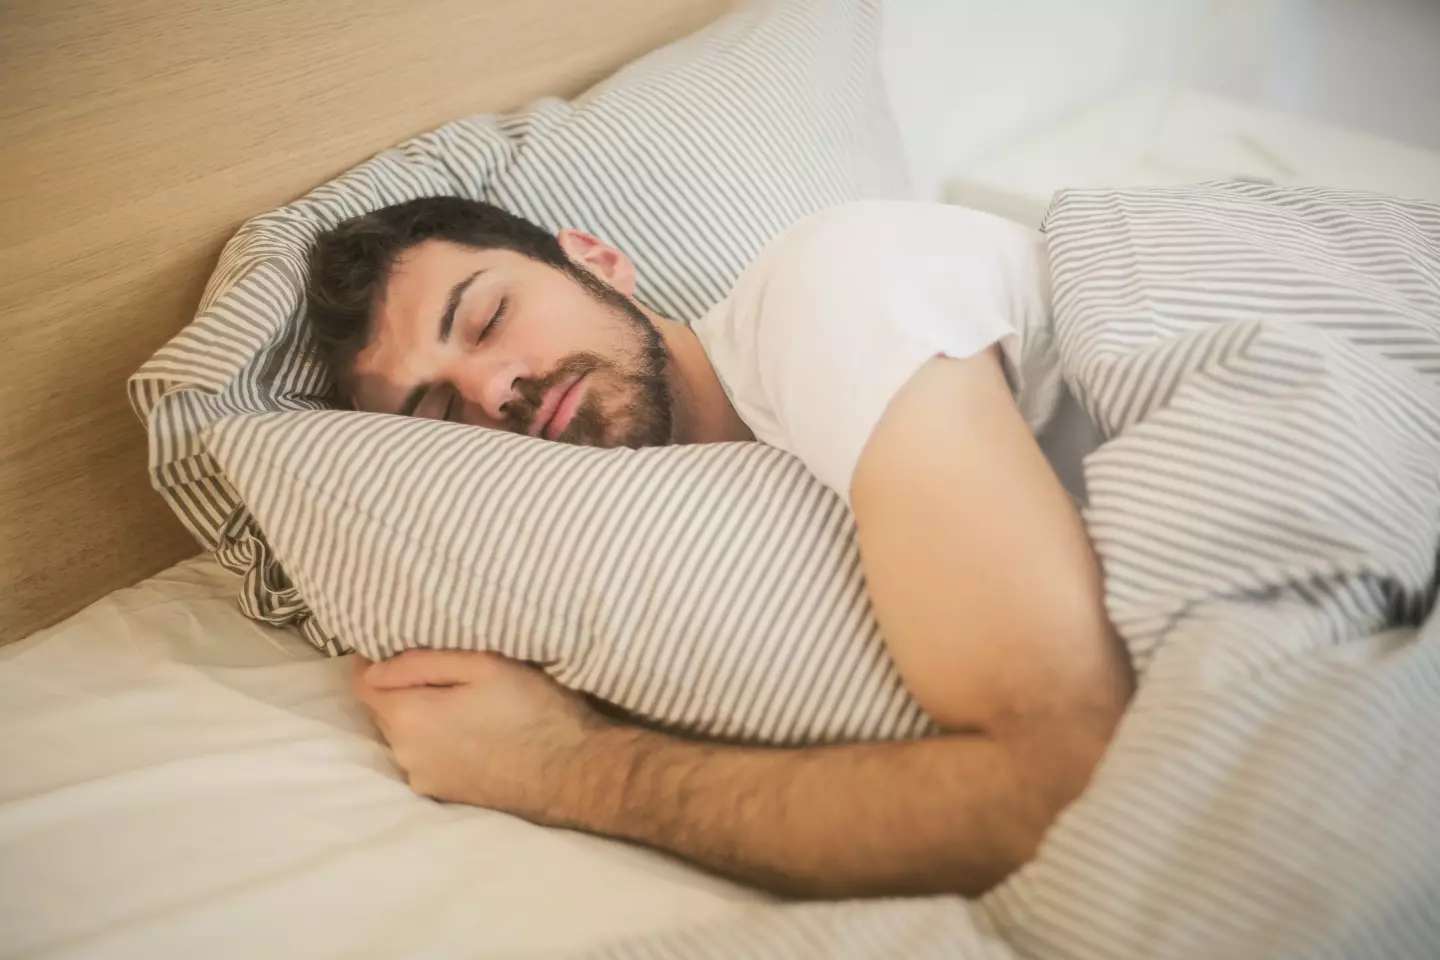 You may have found your sleep has improved since ditching the booze.